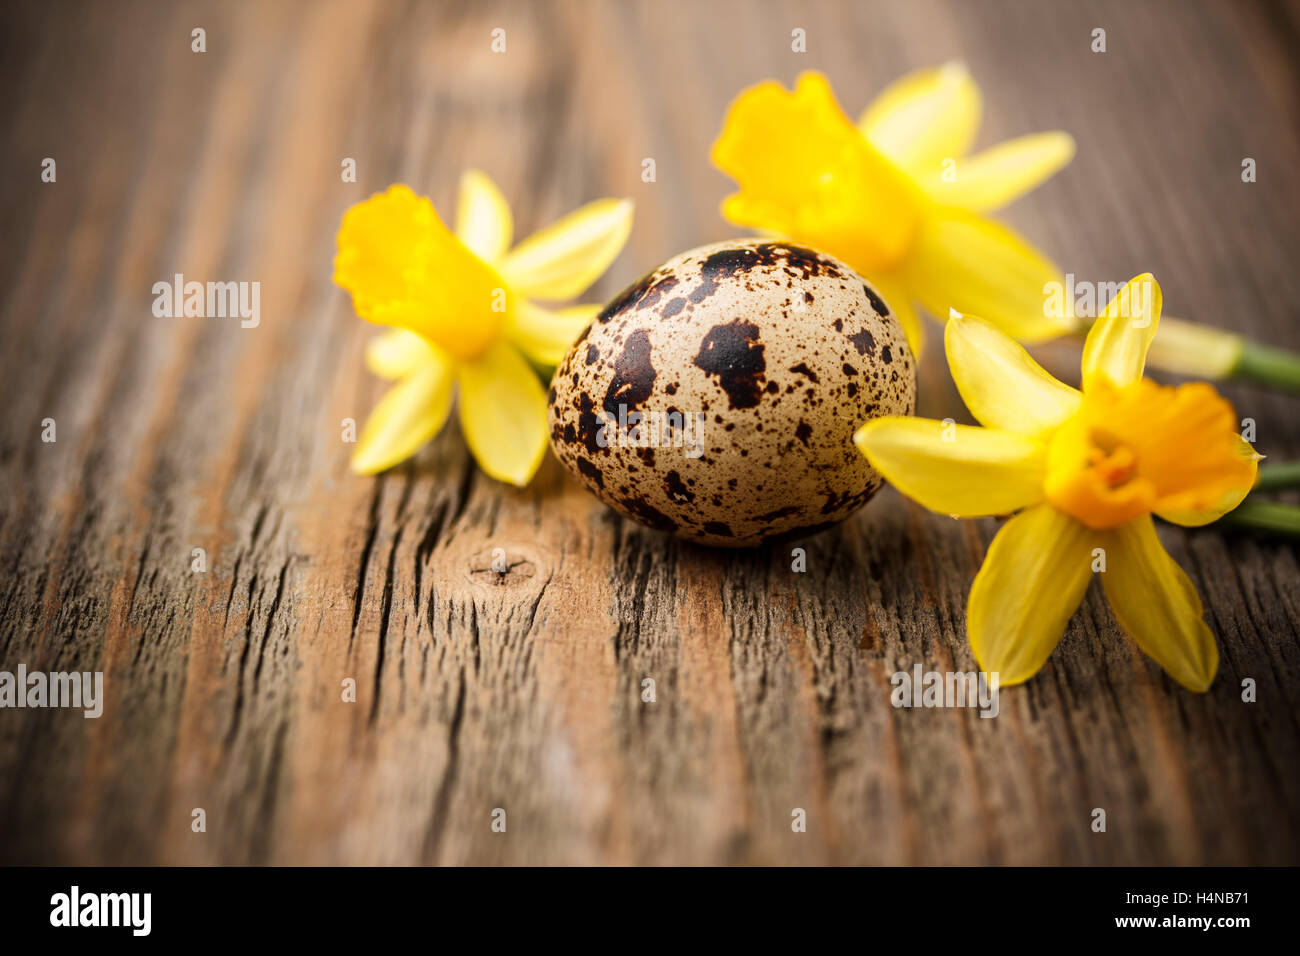 Quail egg with flowers on rustic wooden background Stock Photo